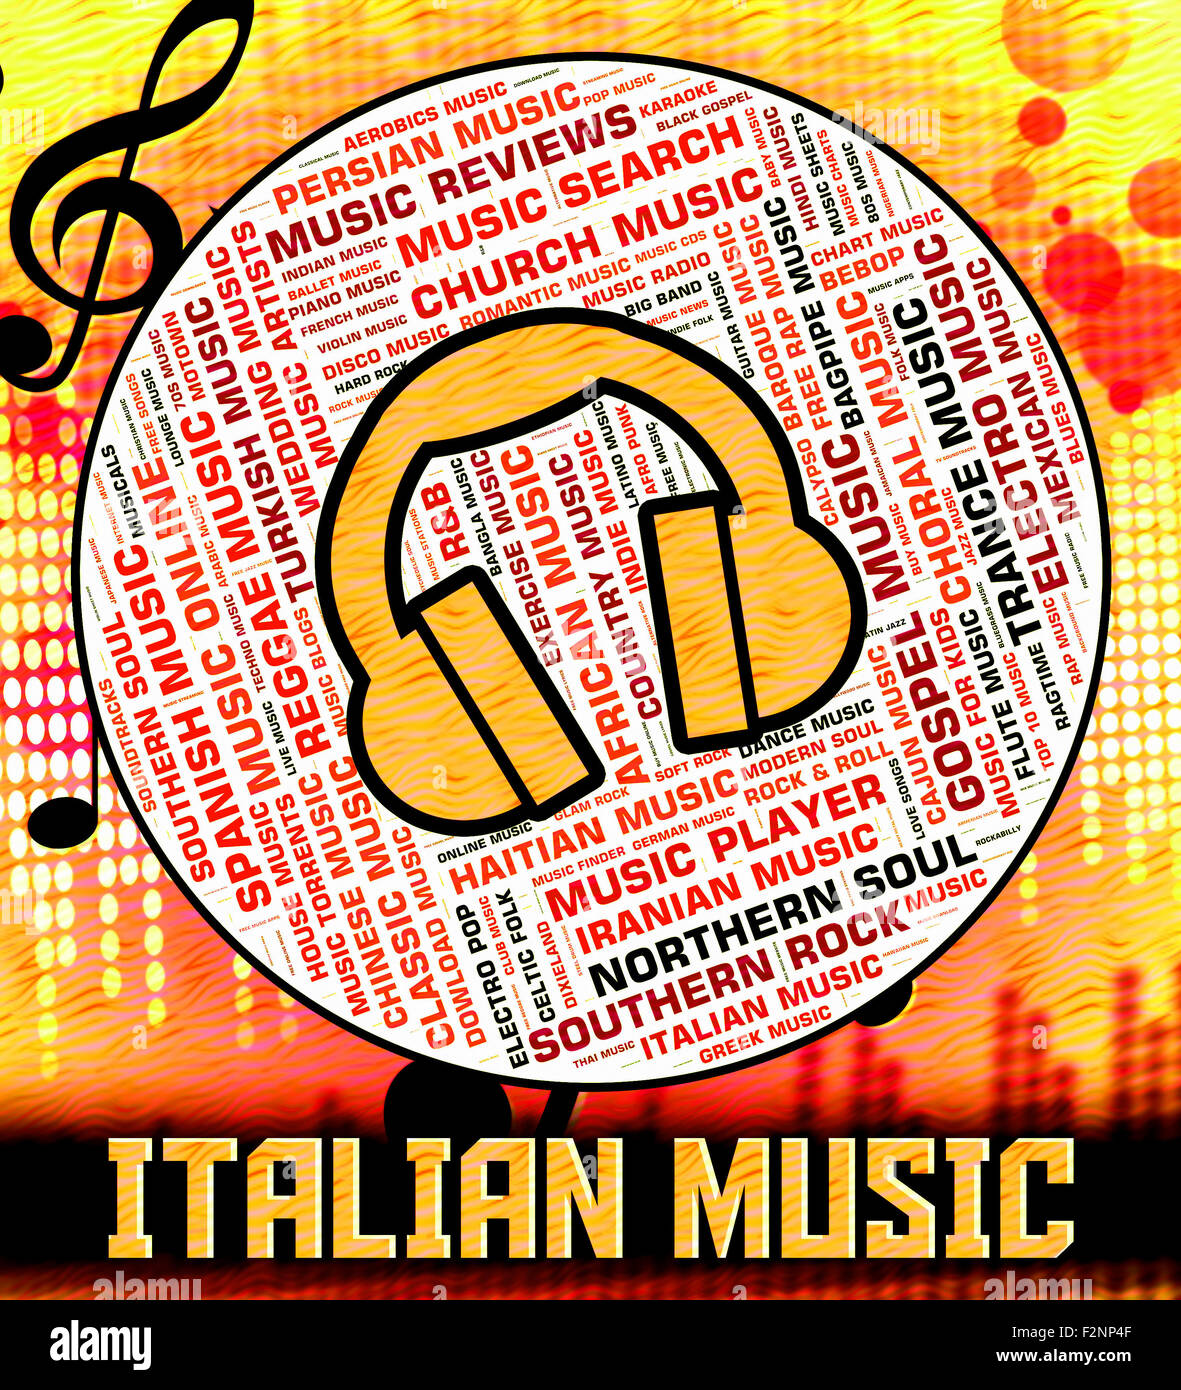 Italian Music Showing Sound Tracks And Song Stock Photo